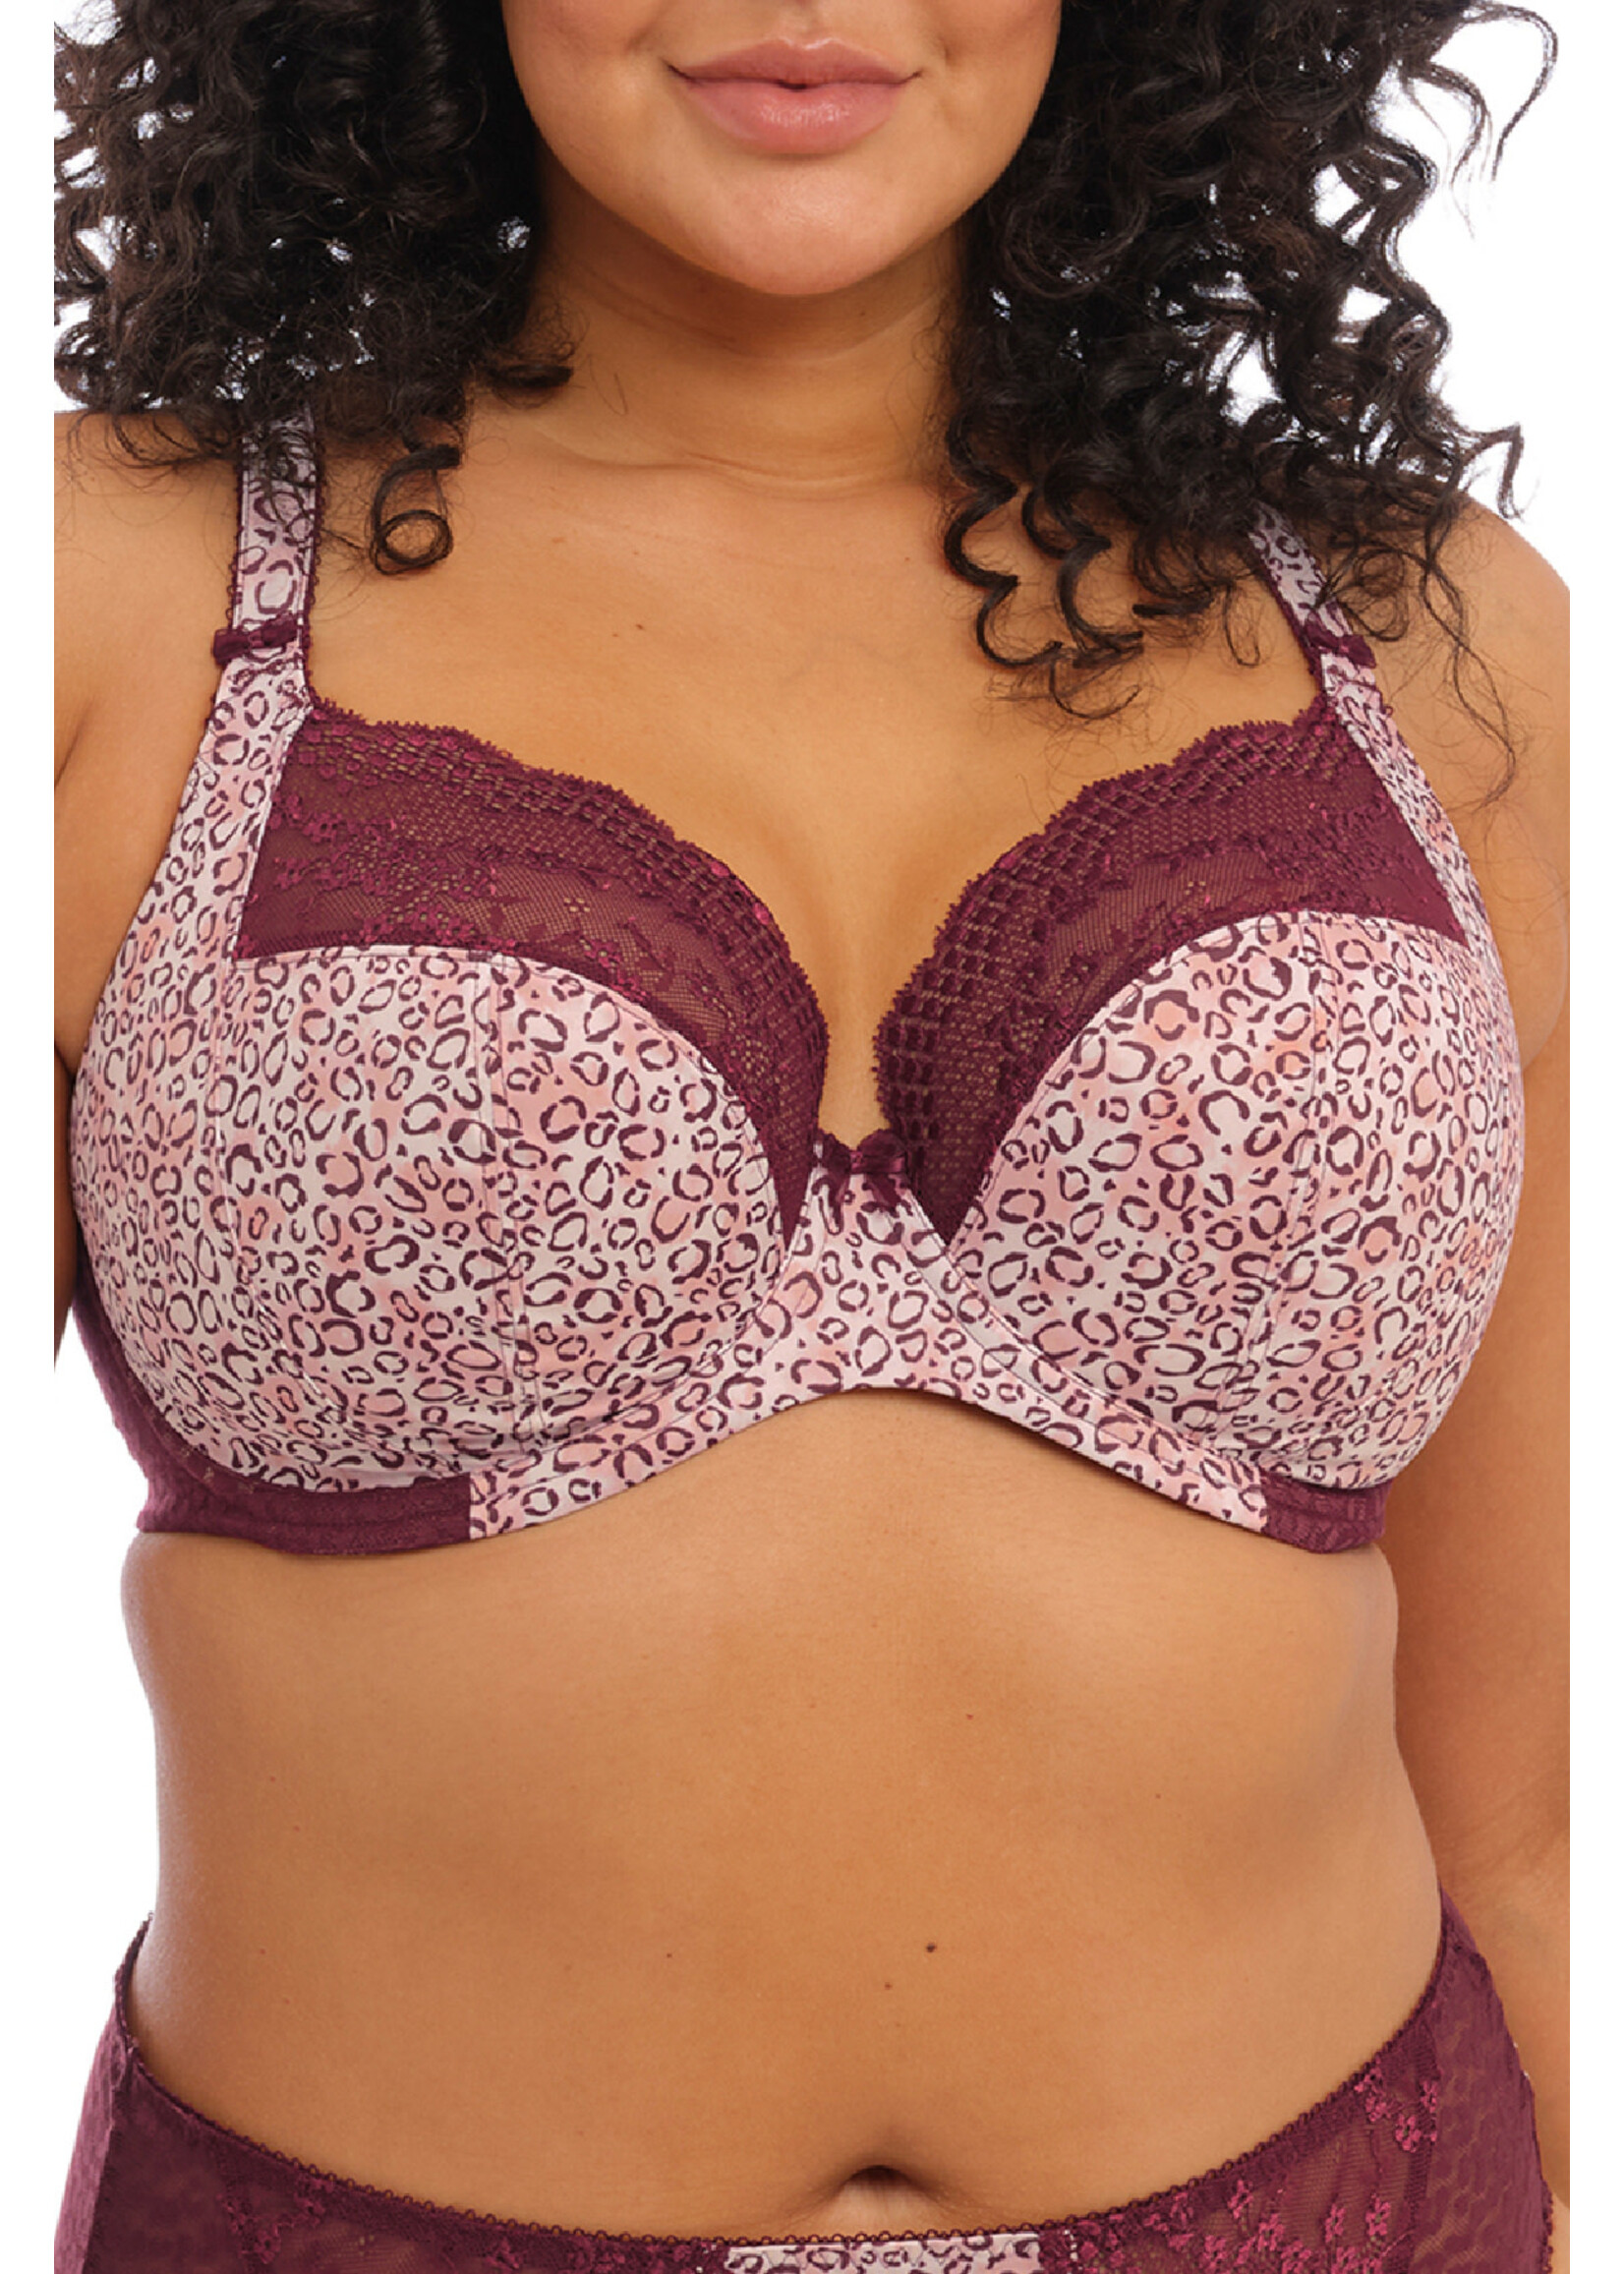 Plunge Bra Benefits - what are the benefits of a plunge bra?